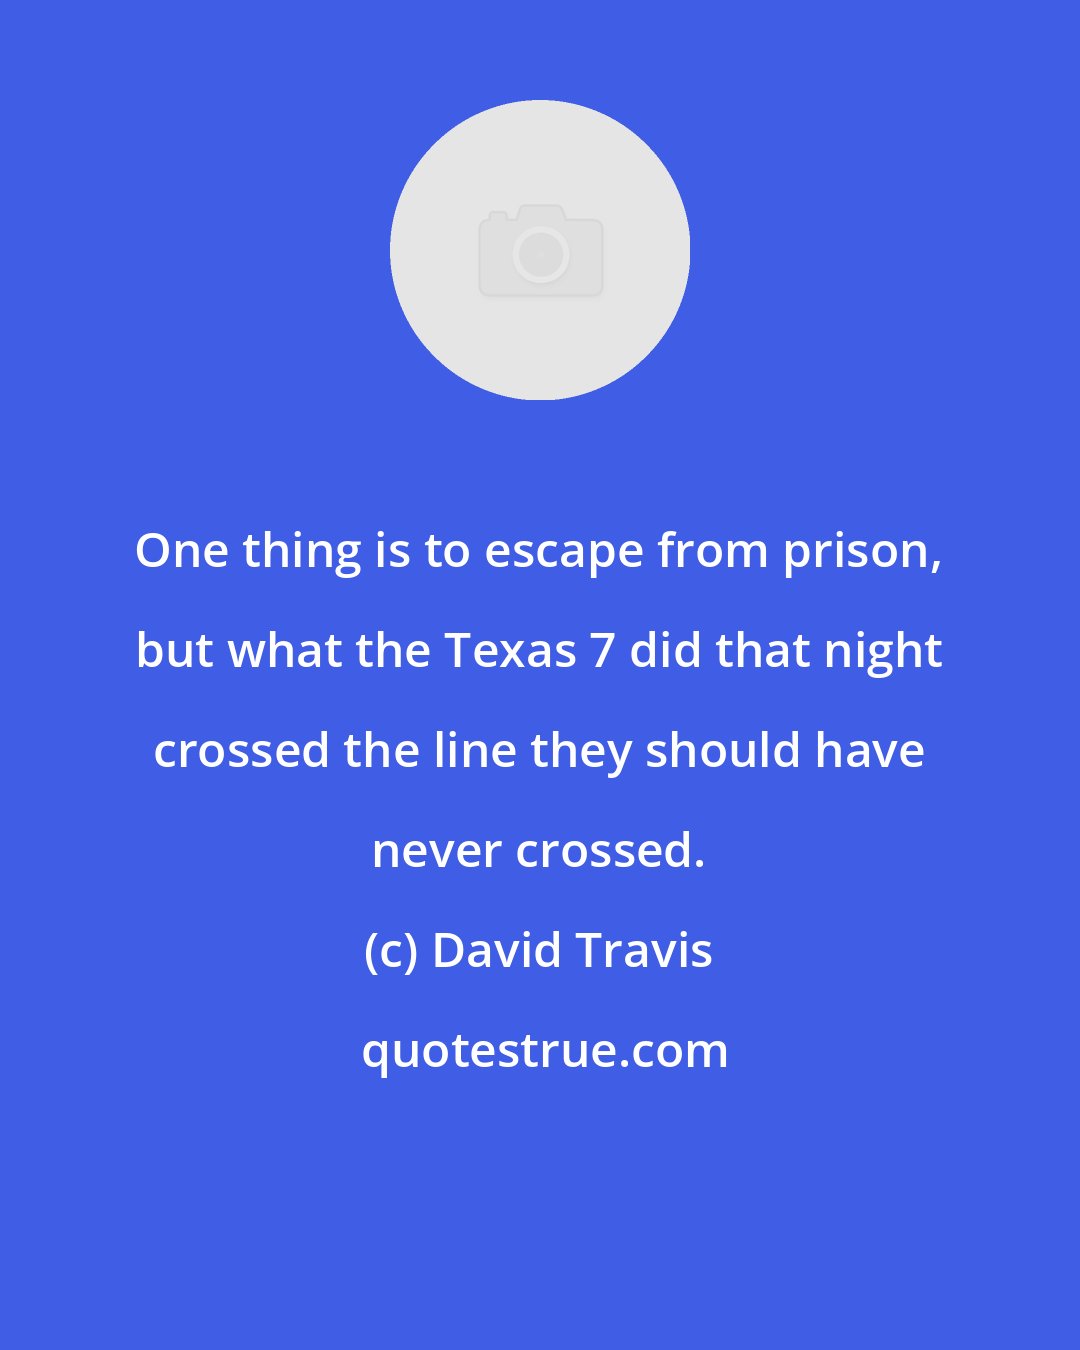 David Travis: One thing is to escape from prison, but what the Texas 7 did that night crossed the line they should have never crossed.